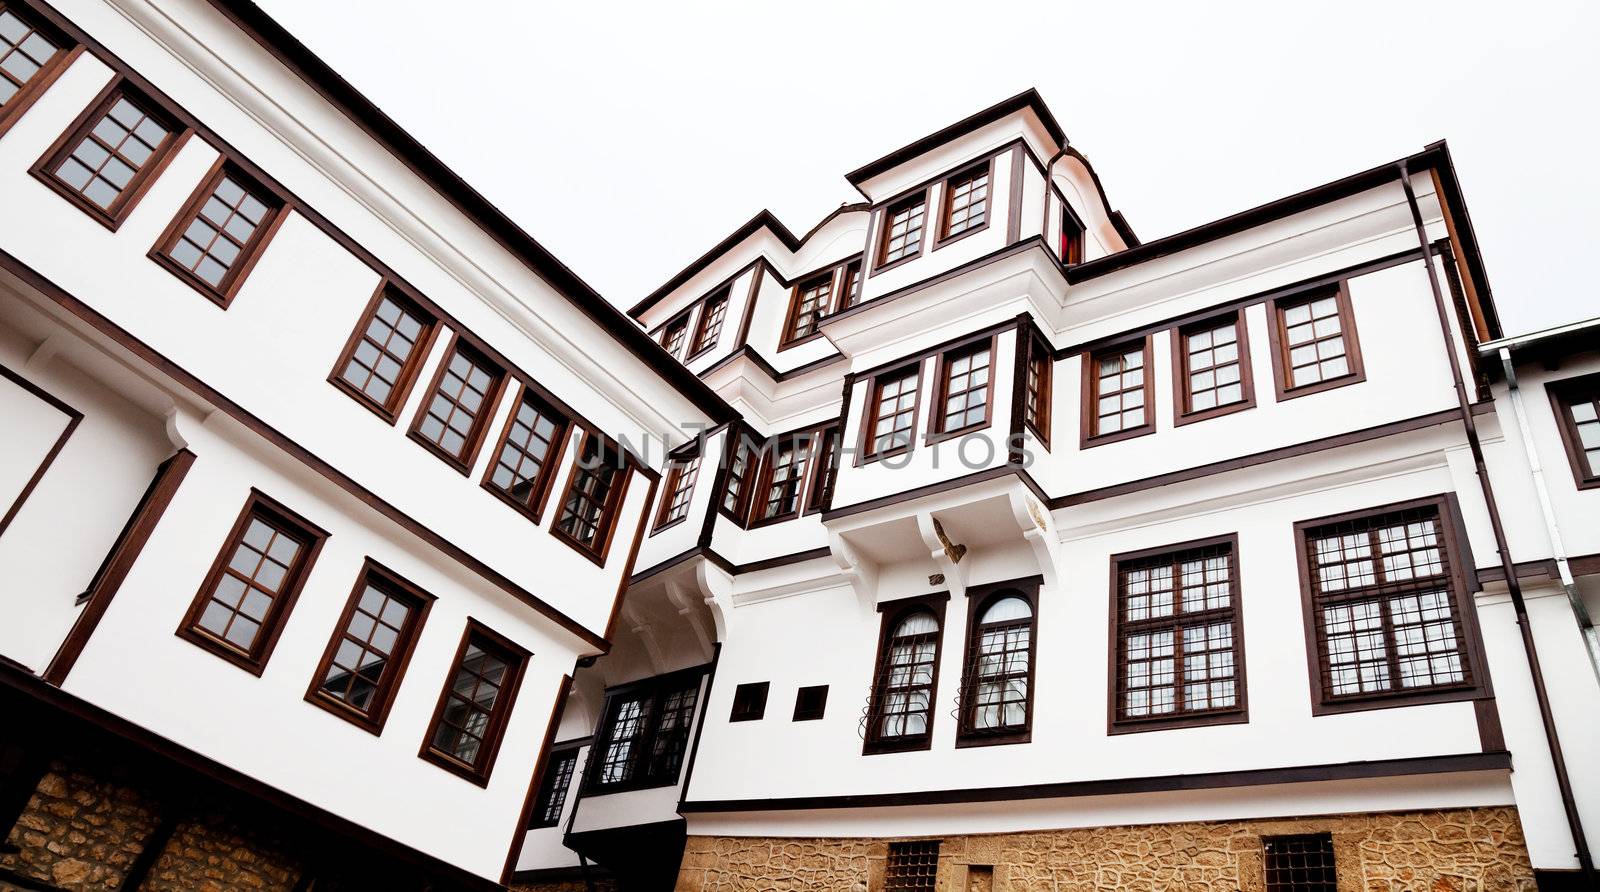 Museum building in The town of Ohrid Macedonia.